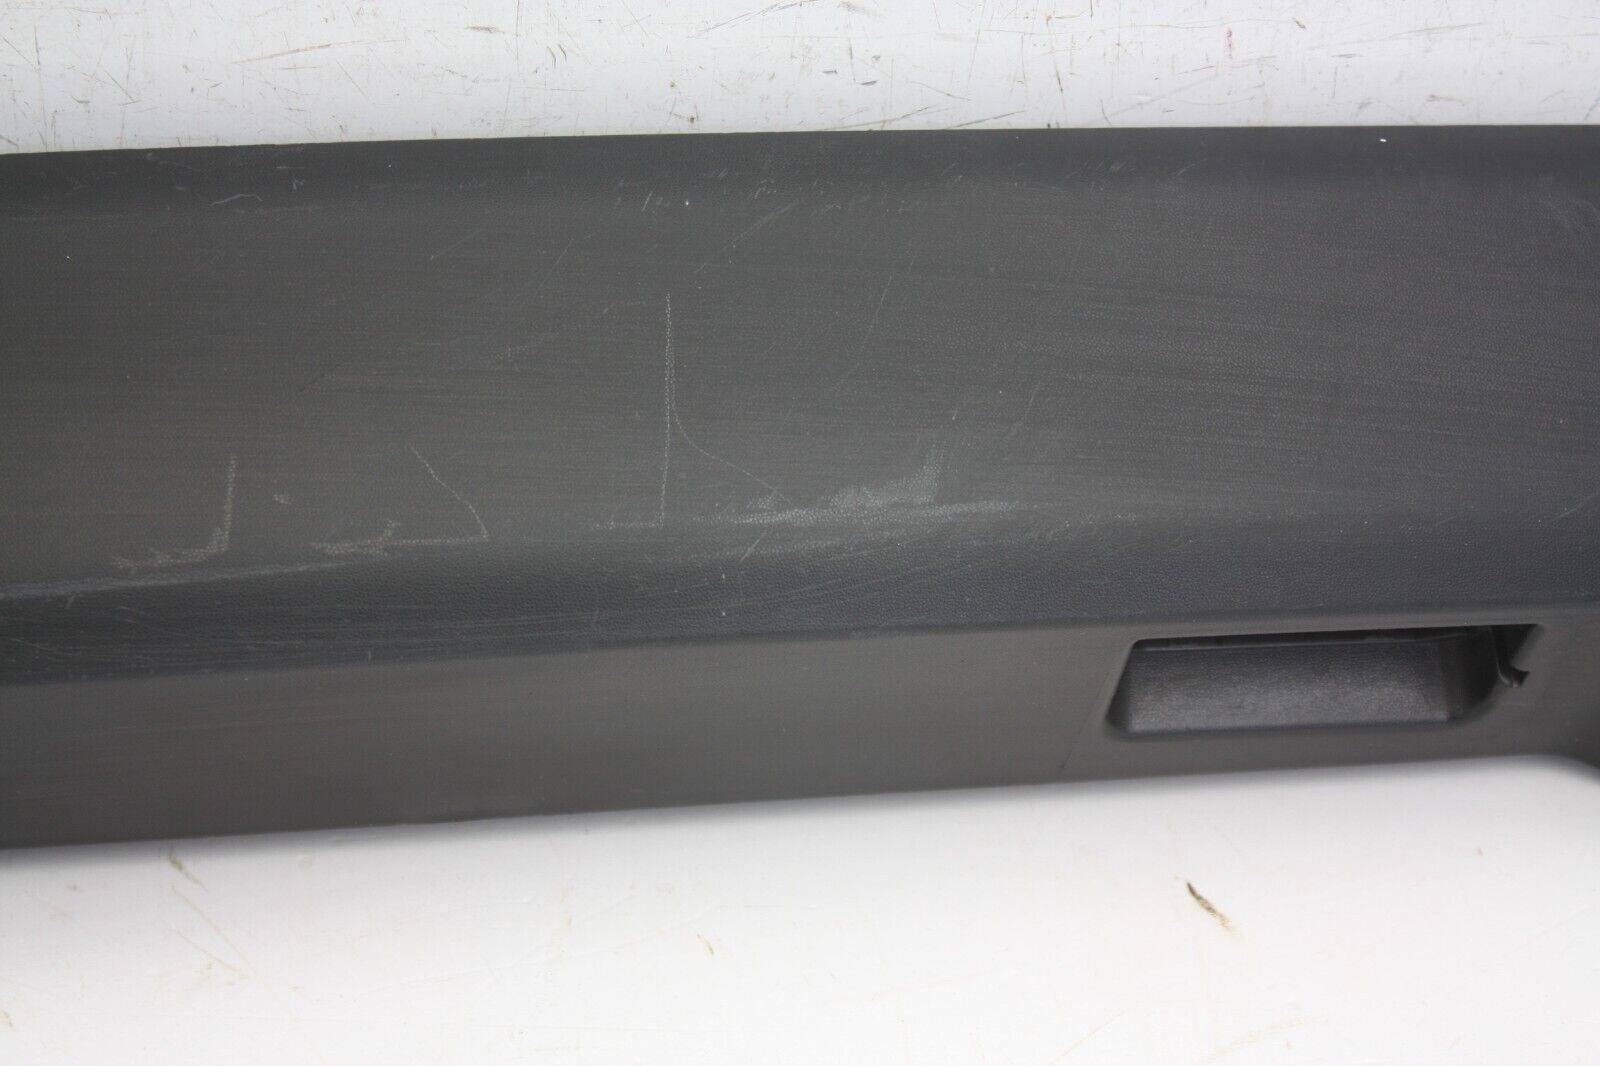 Ford-Transit-Custom-Tailgate-Lid-Cover-Recording-Bar-2018-ON-BK21-13555-AFW-176302846649-8